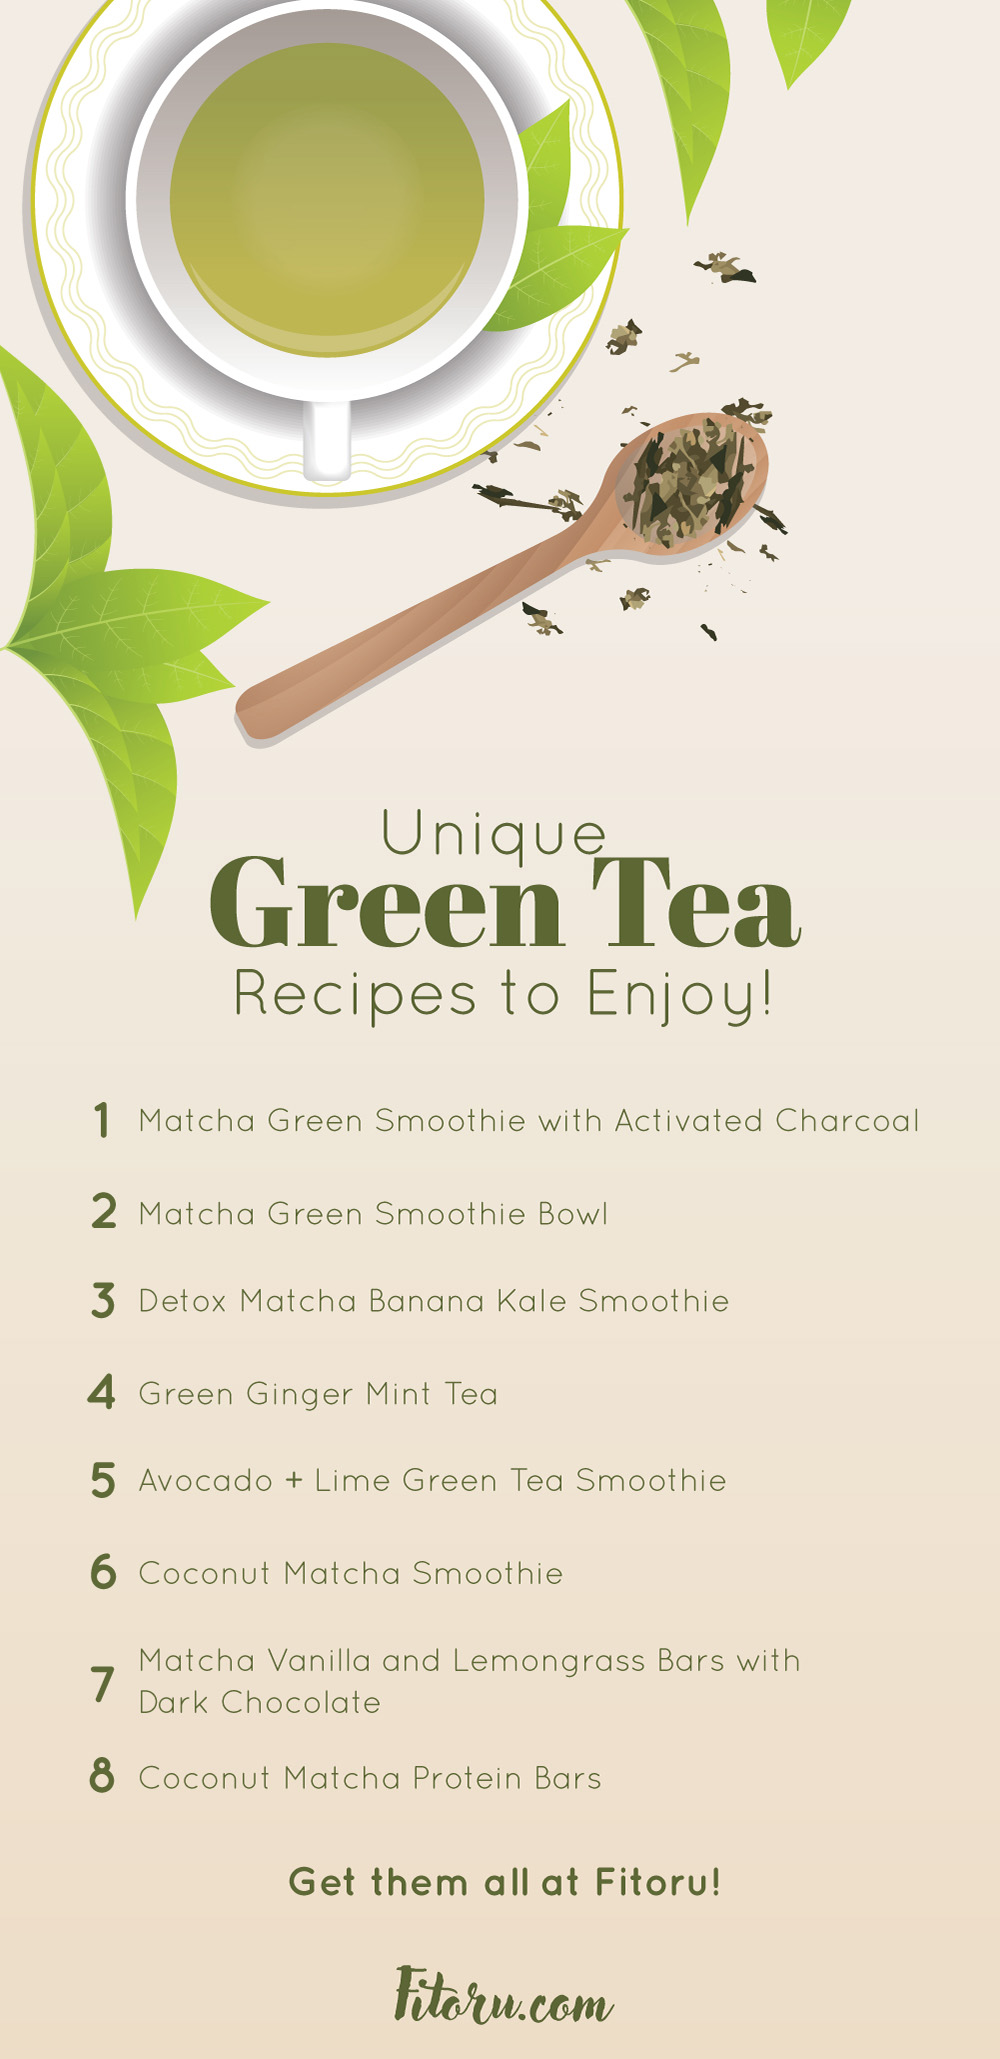 Are you ready to transform your body with green tea?